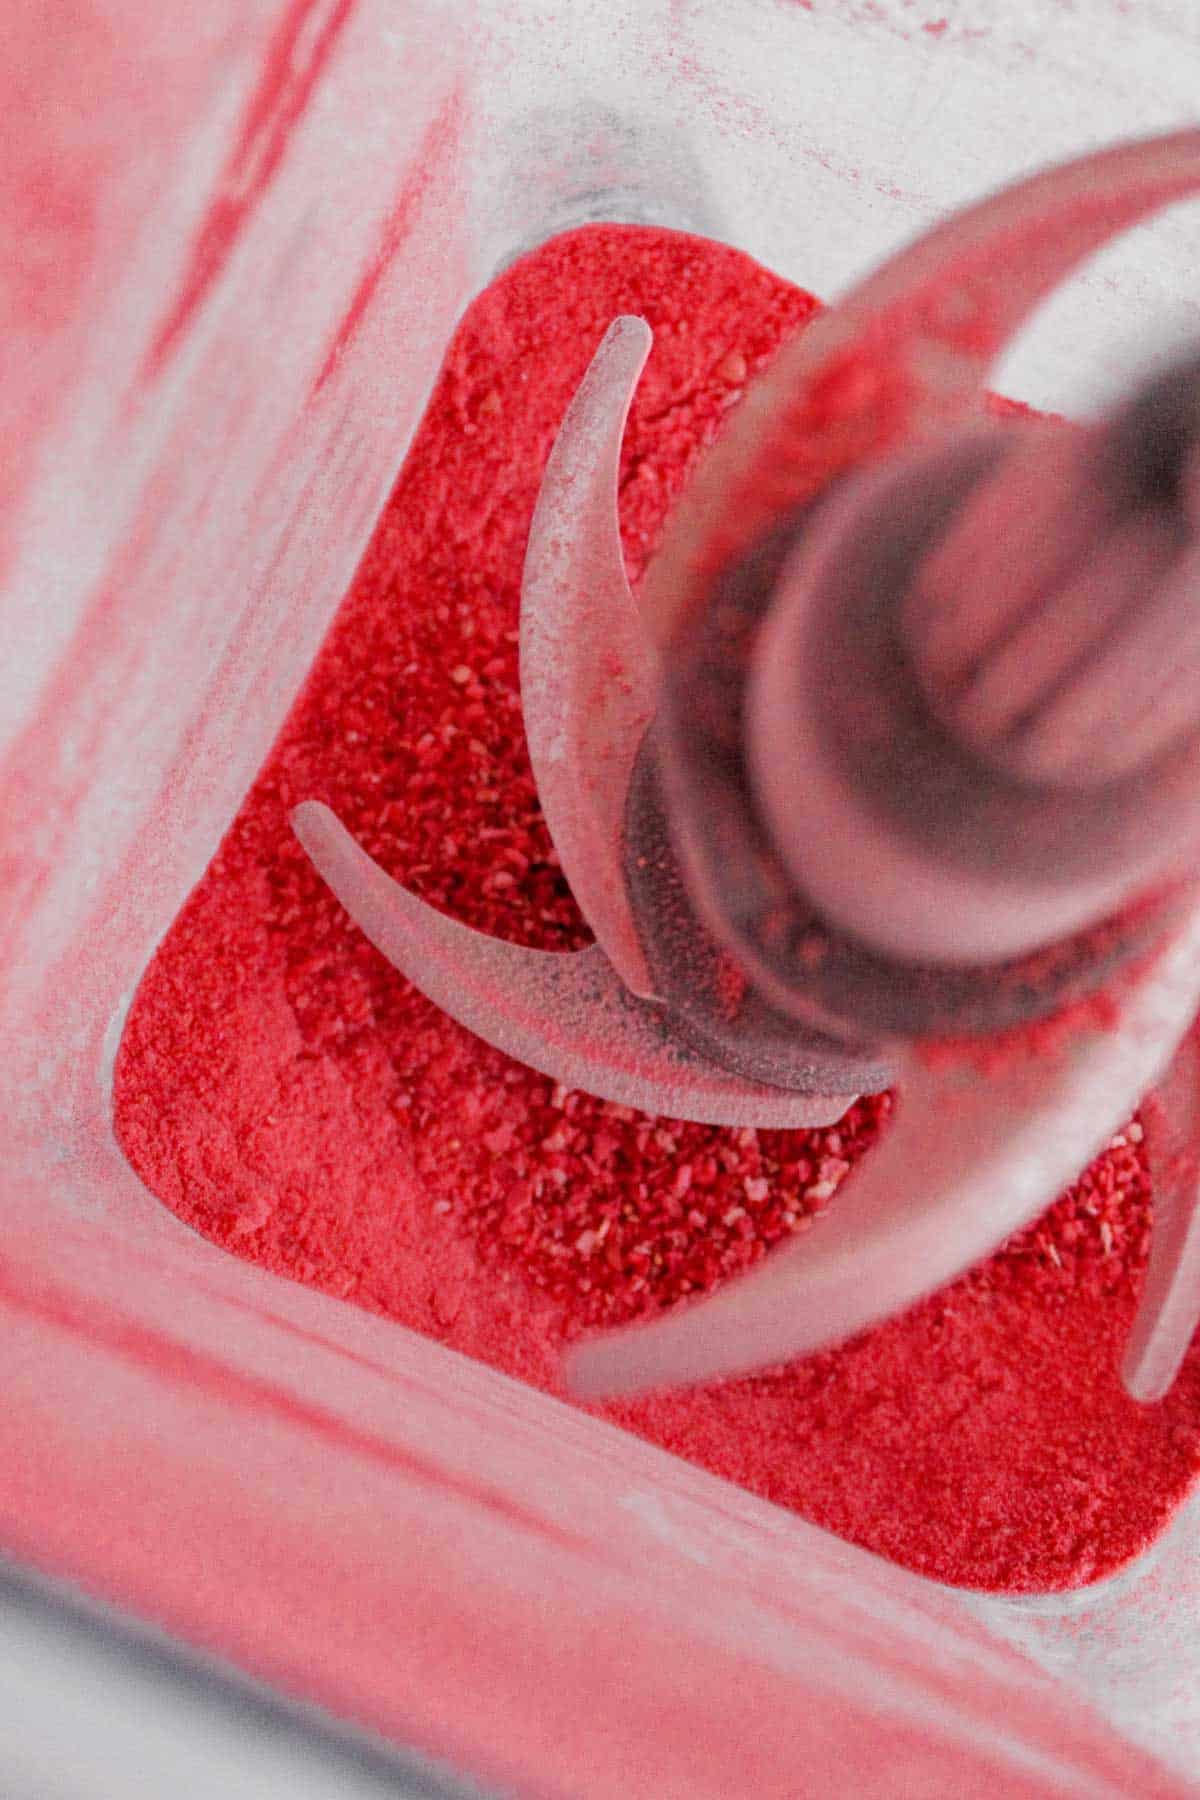 A blender with blended freeze dried strawberries blended to a powder.